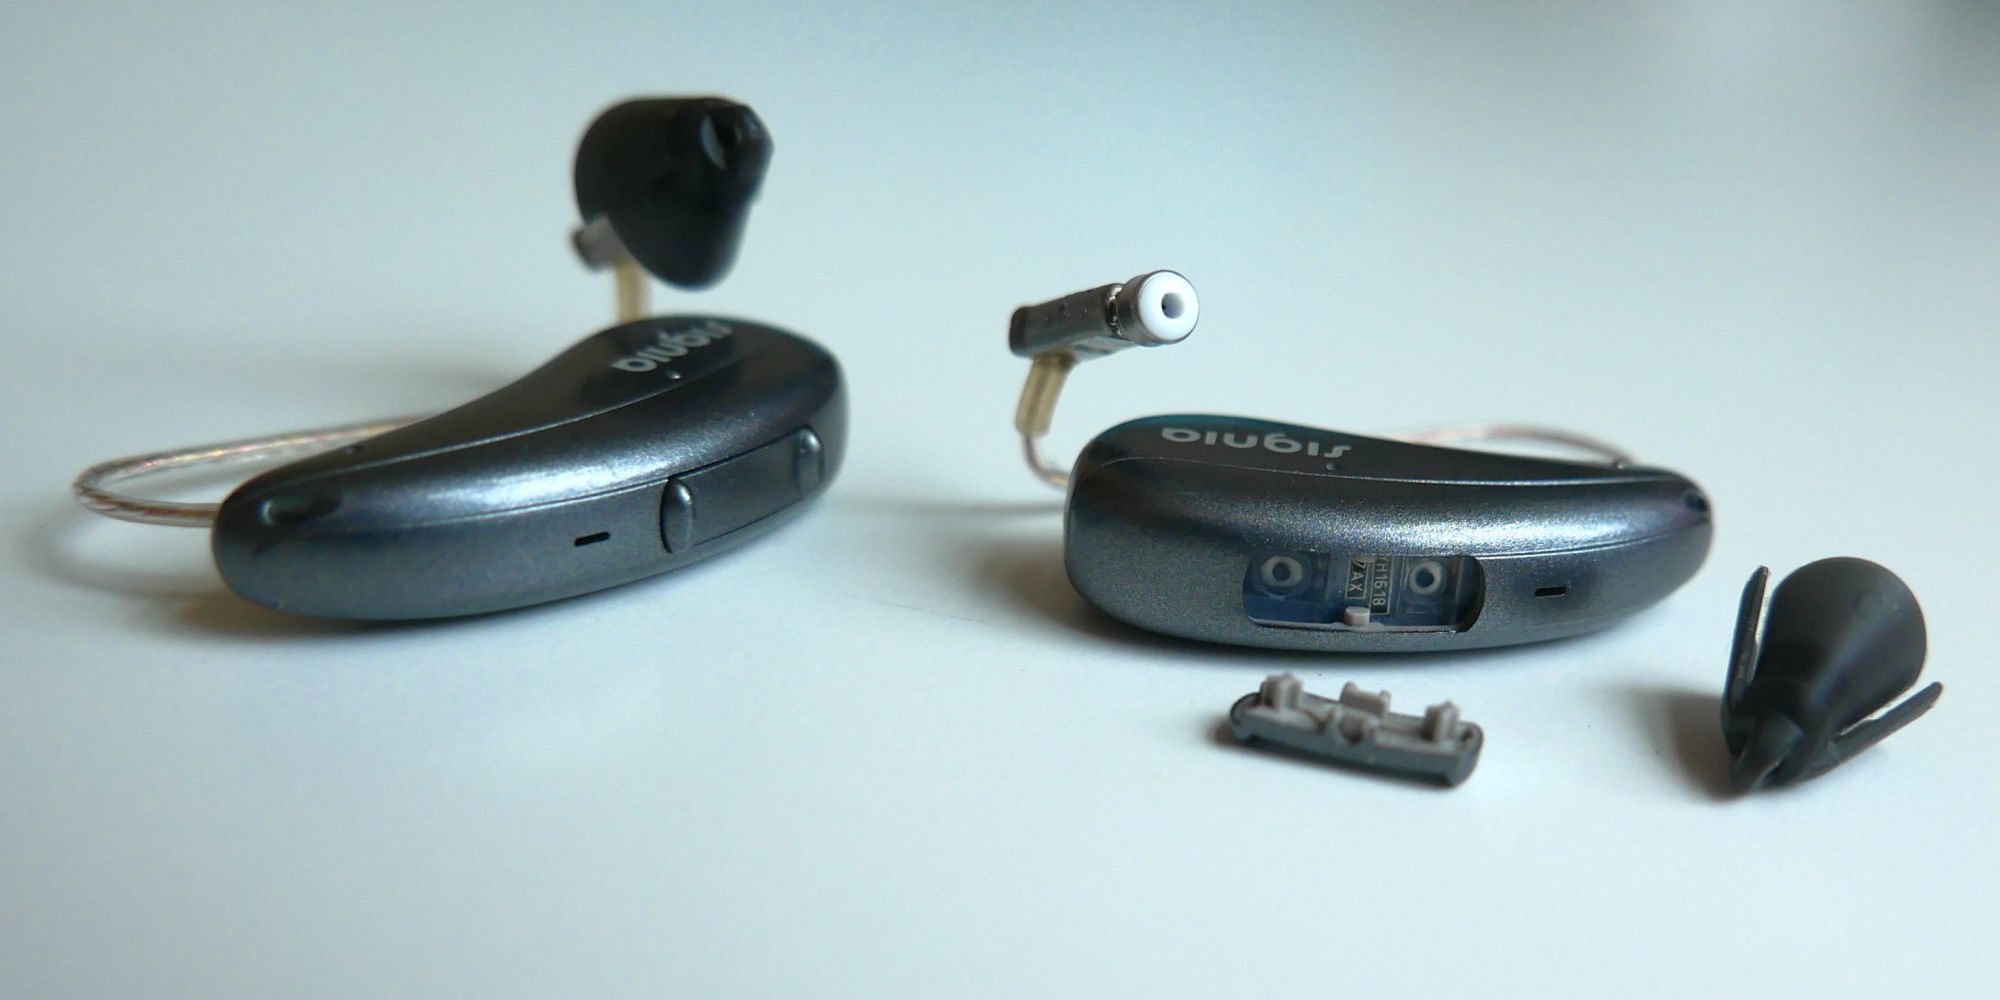 Signia Pure Charge&amp;GO AX hearing aids with rocker switch and eartip removed on one unit.